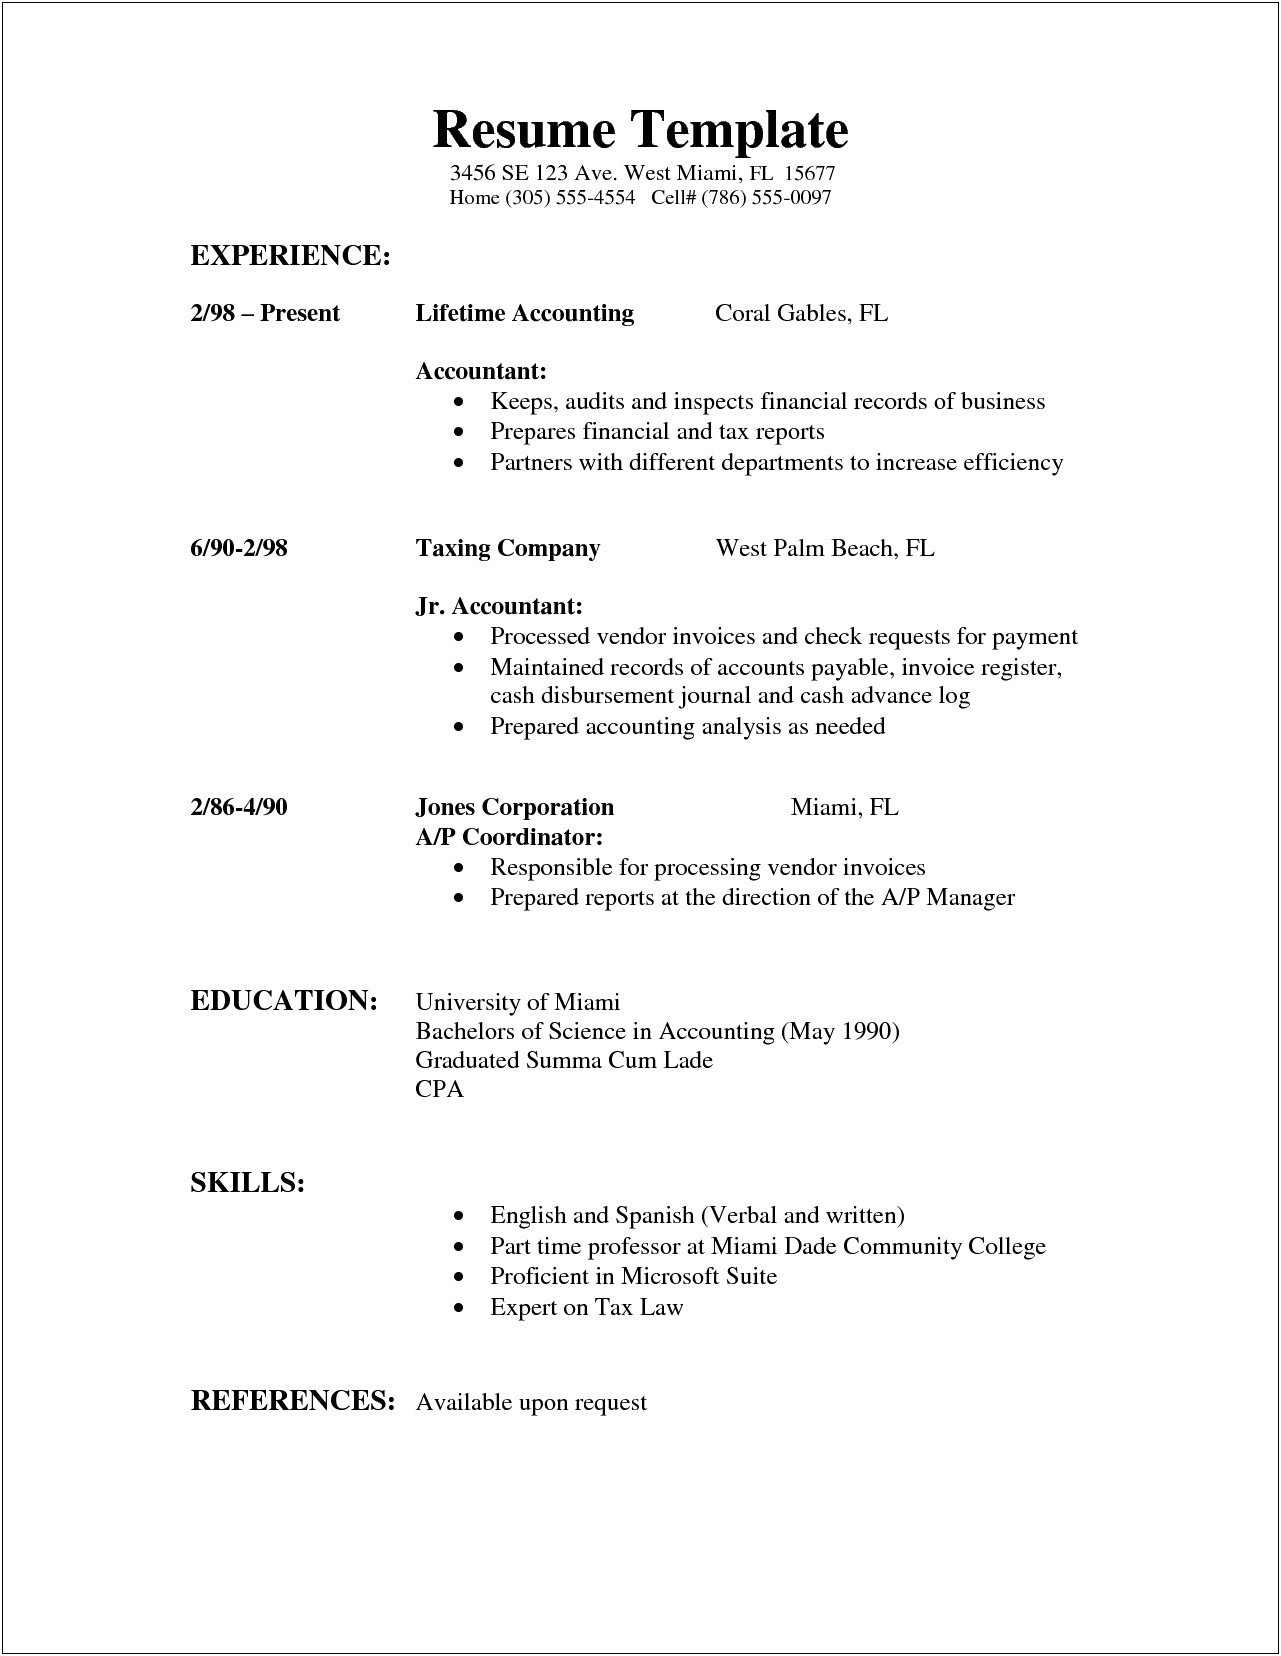 Functional Chronological Combination Resume Examples